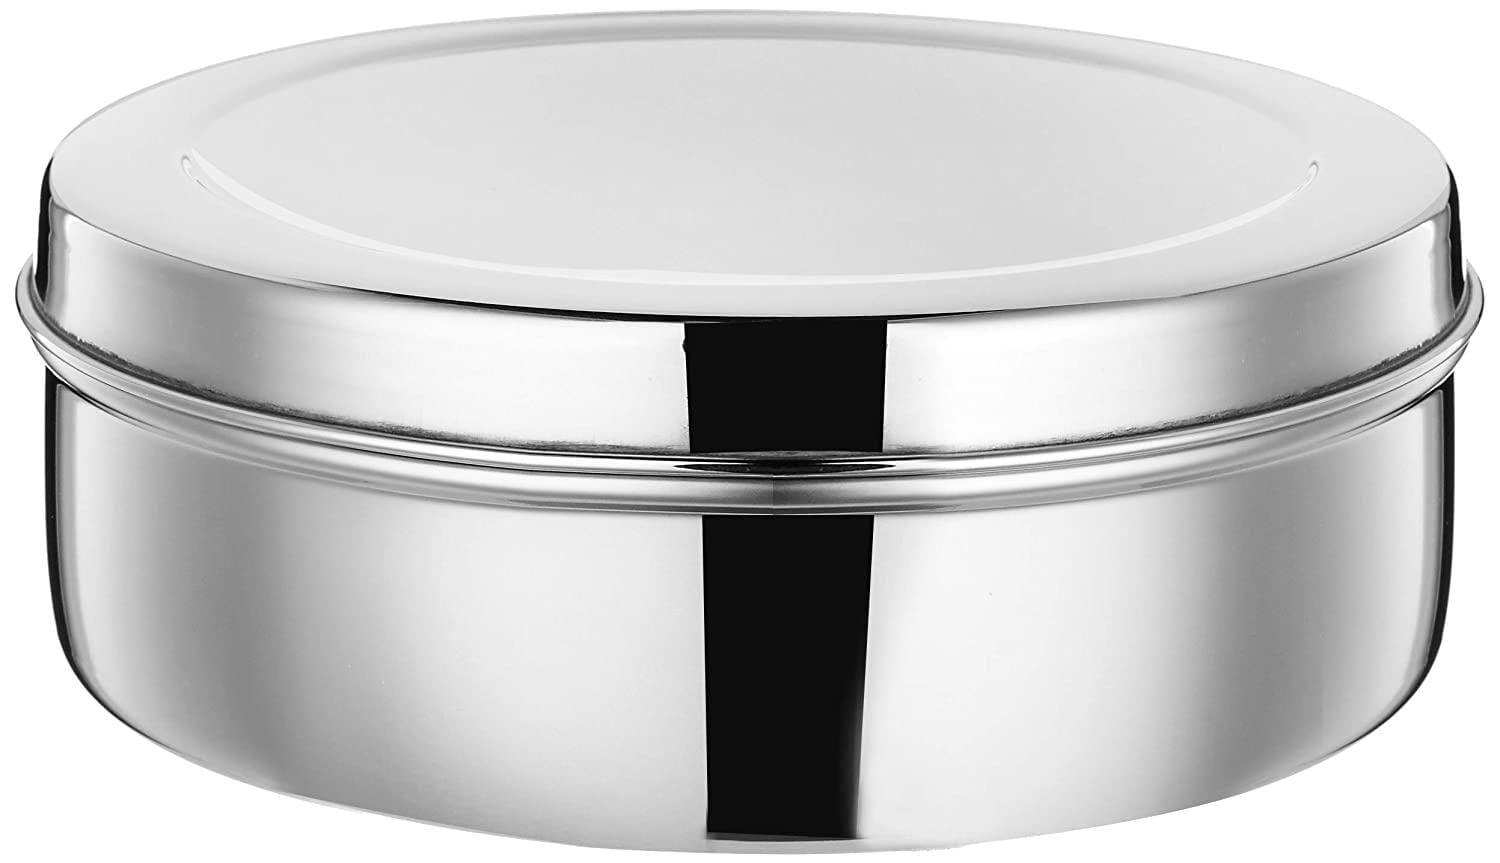 Smartserve Stainless Steel Sadda Puri Dabba Food Storage Containers | Food Container